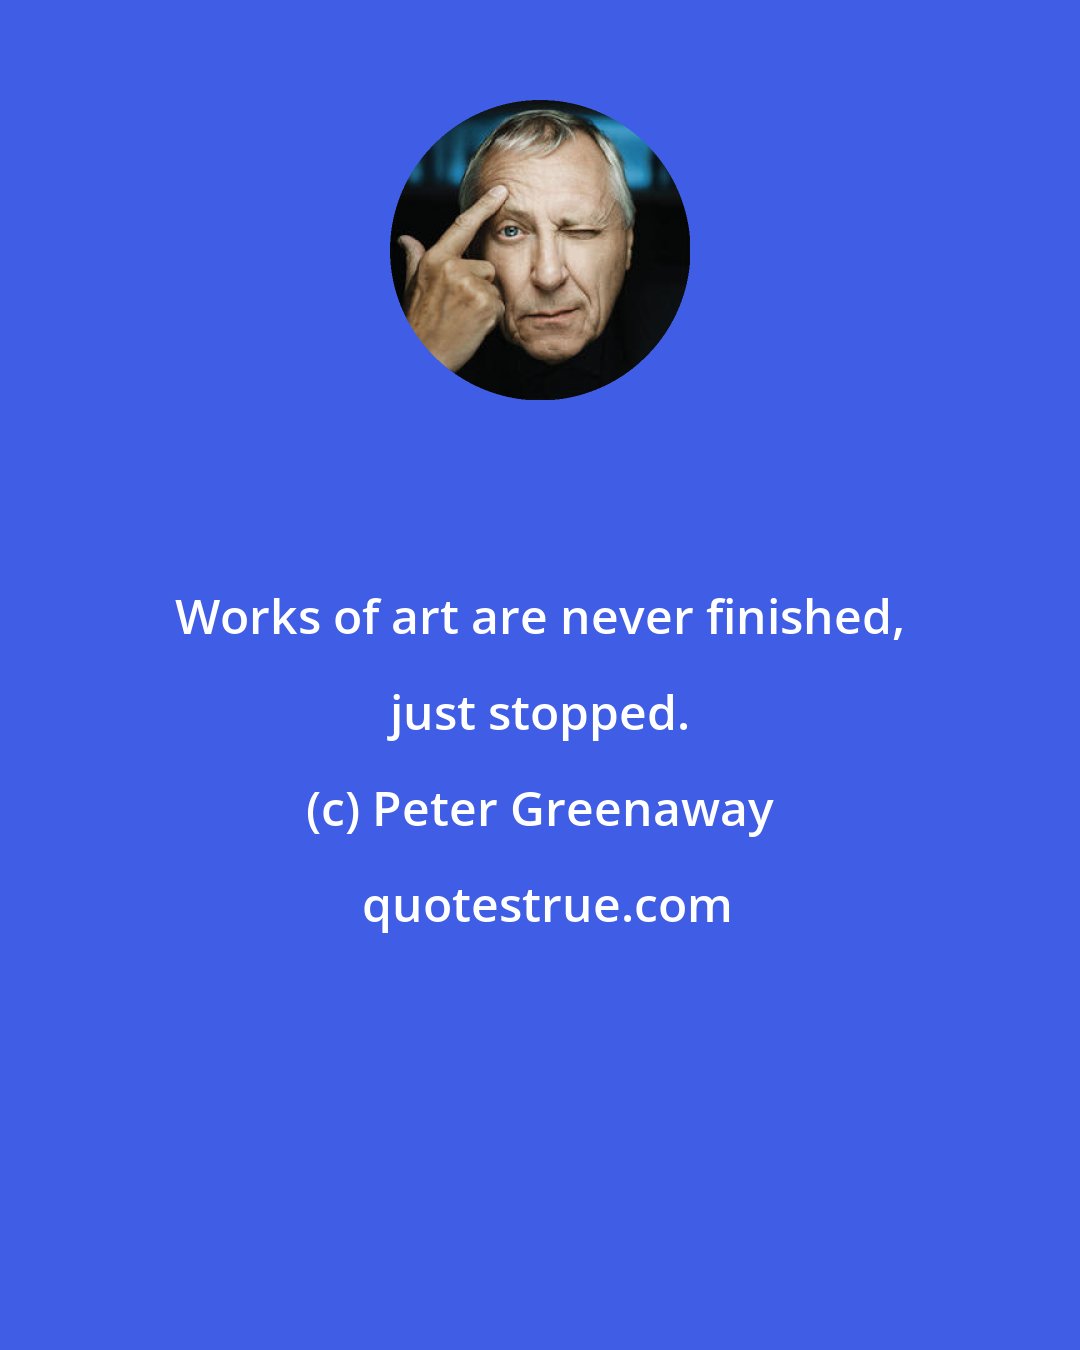 Peter Greenaway: Works of art are never finished, just stopped.